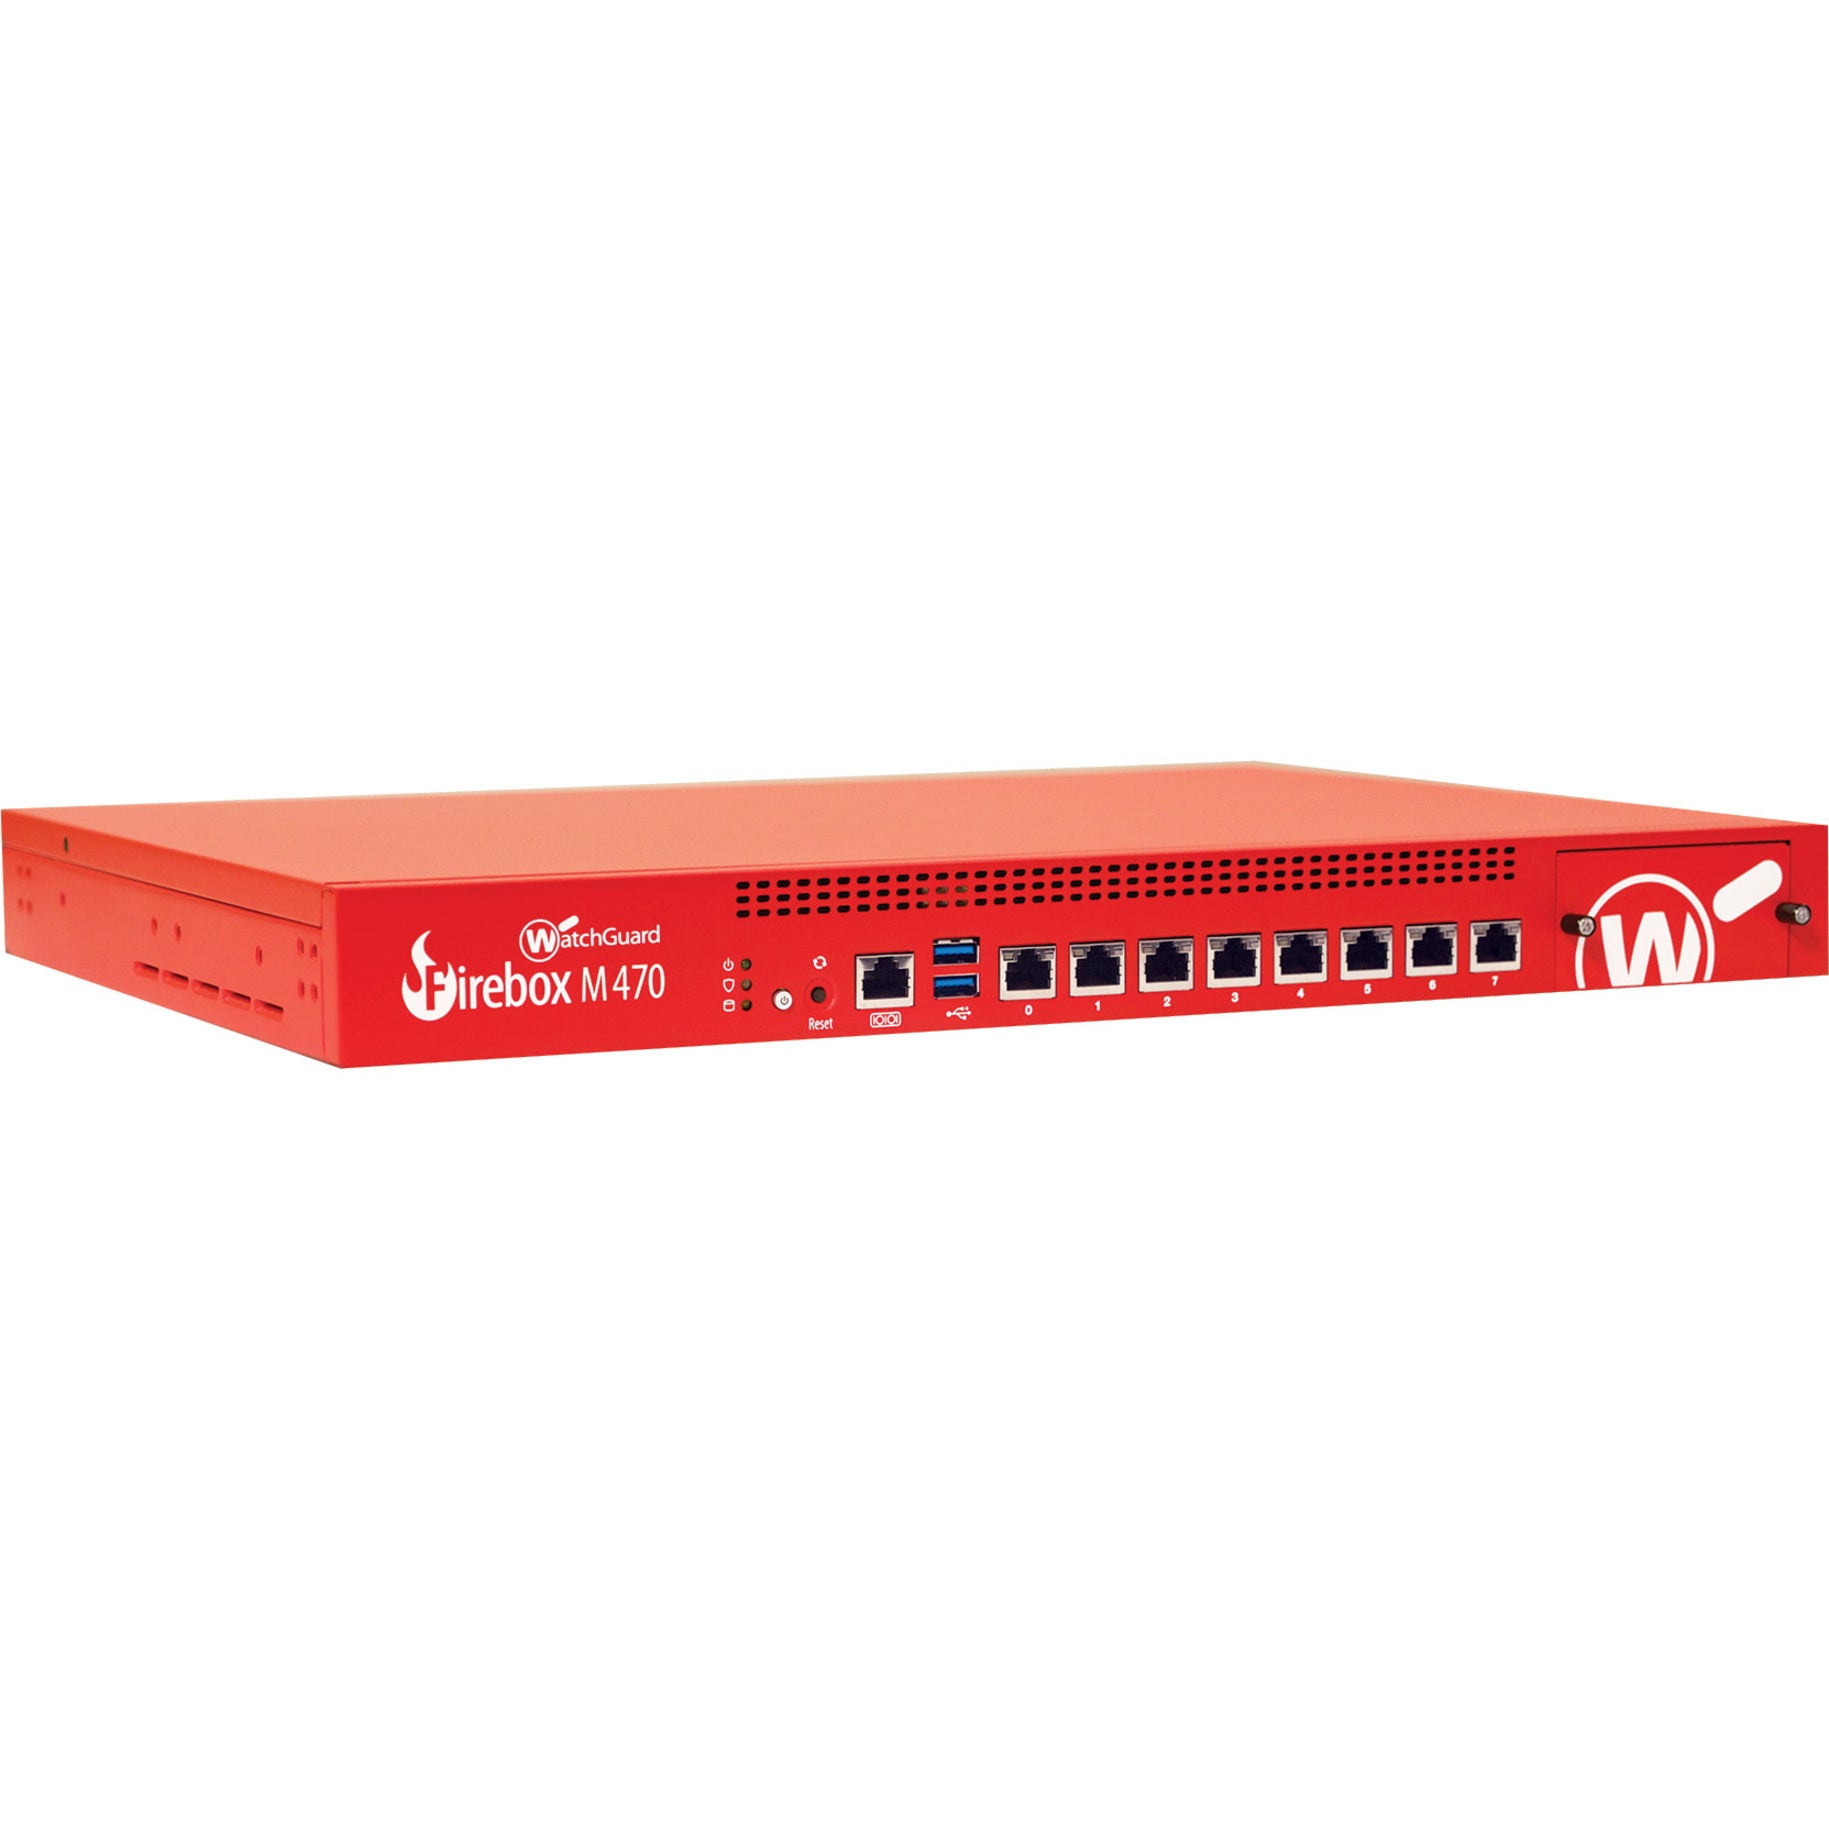 WatchGuard WGM47063 Firebox M470 Network Security/Firewall Appliance, Trade Up to 3-yr Basic Security Suite